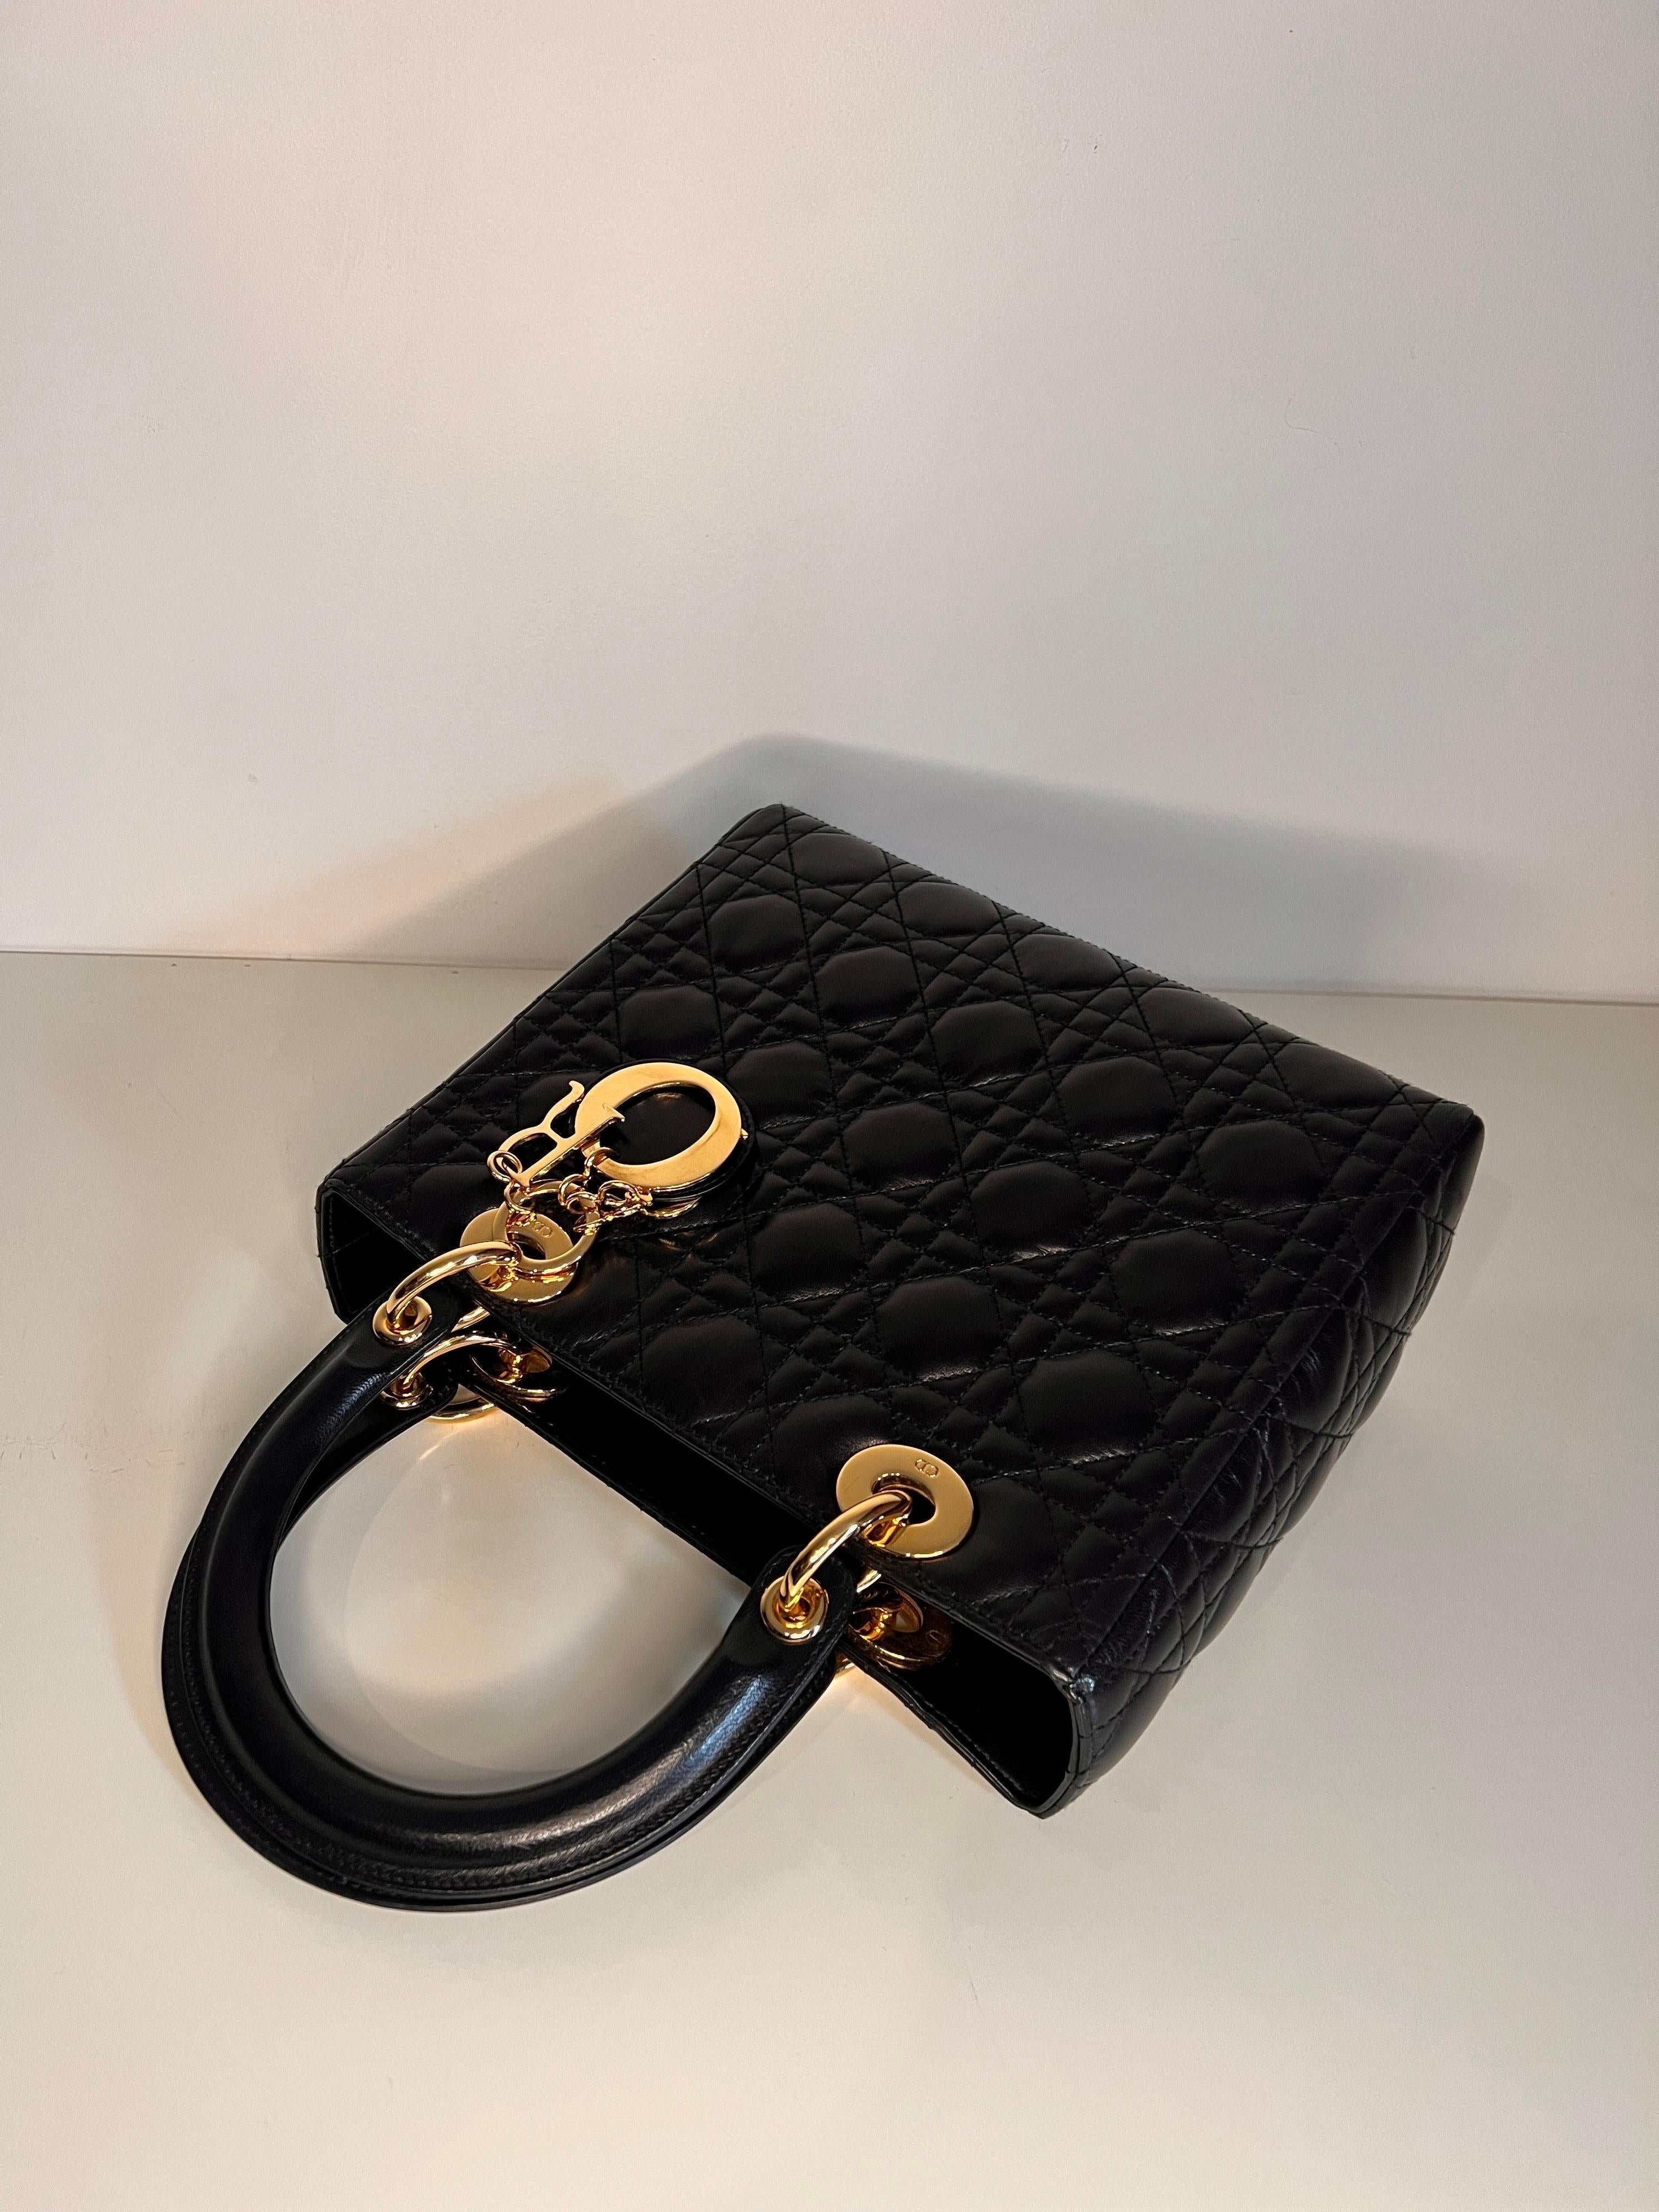 Lady DIOR quilted handbag with gold hardware, famously worn by Princess Diana  1